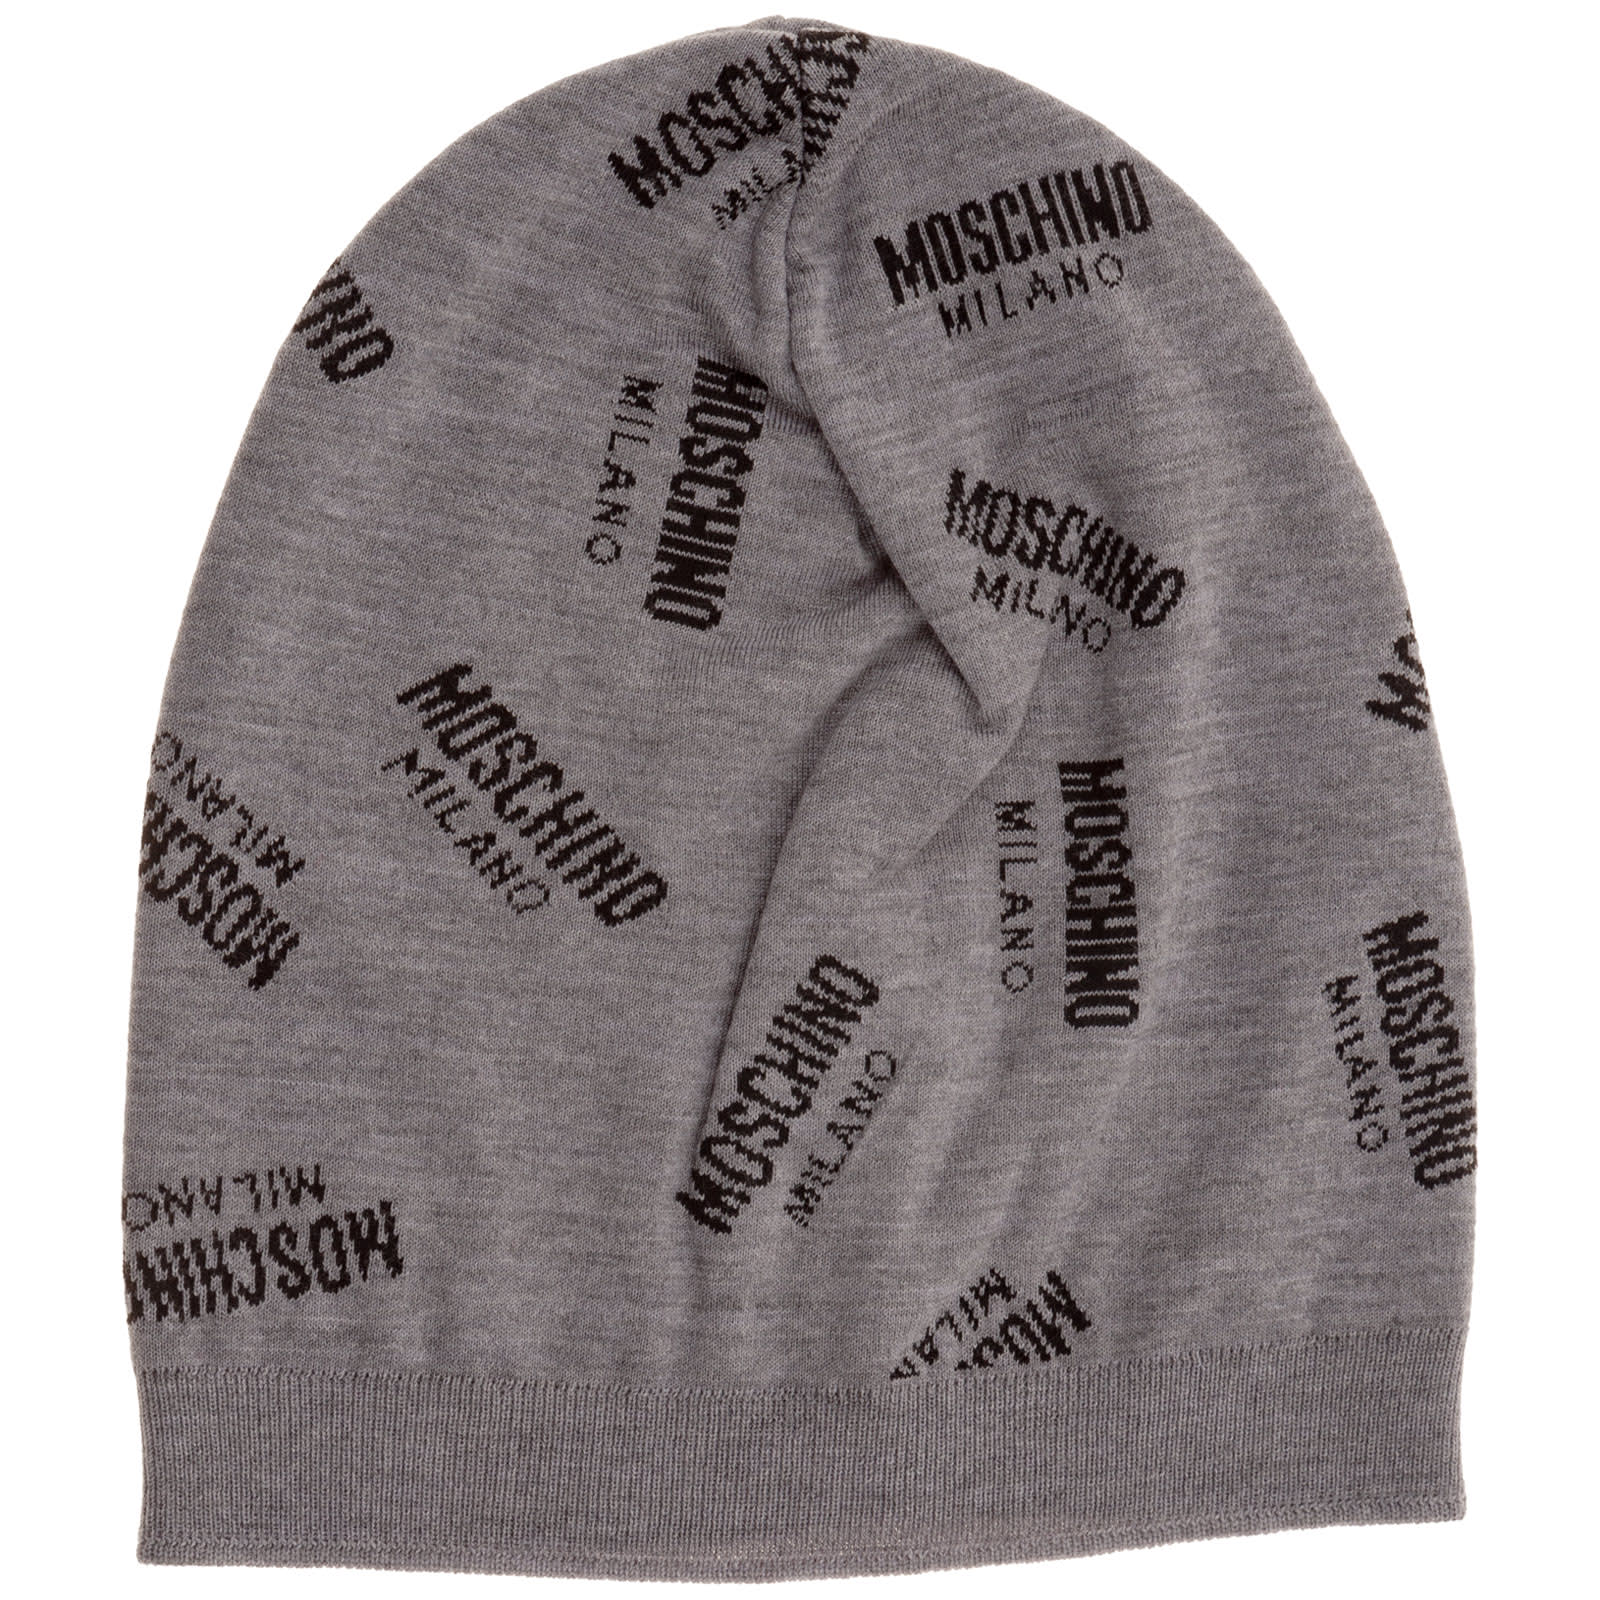 MOSCHINO DOUBLE QUESTION MARK BEANIE,M525060068014